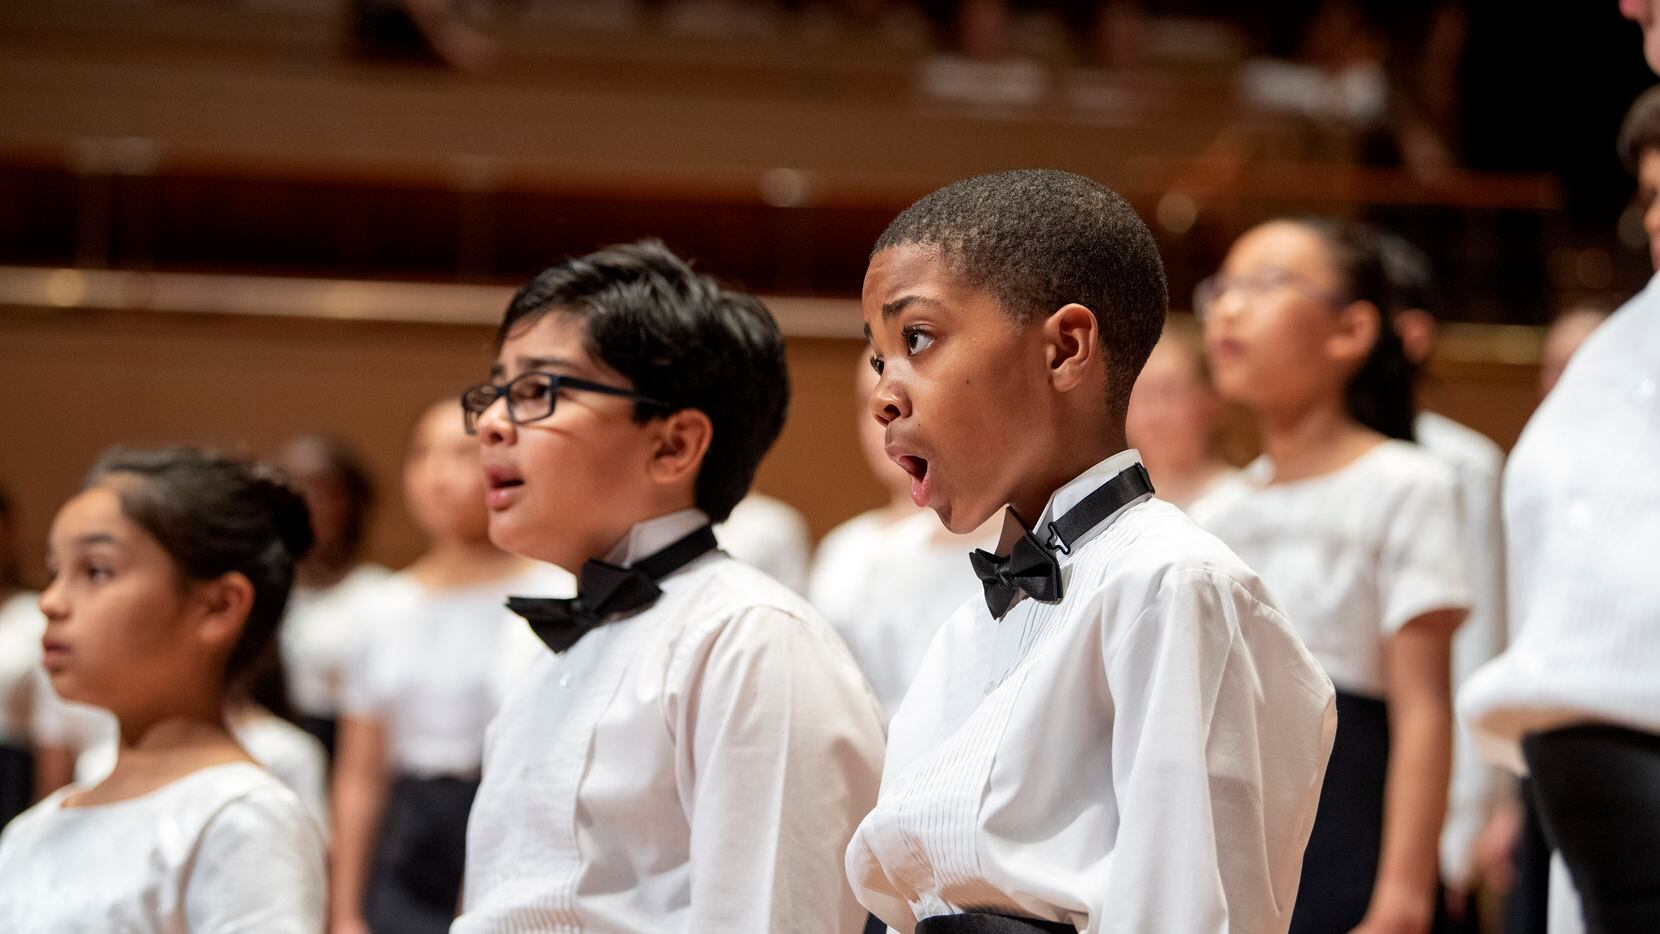 A photo from the Children's Chorus of Greater Dallas' 2019 holiday concert at the Meyerson...